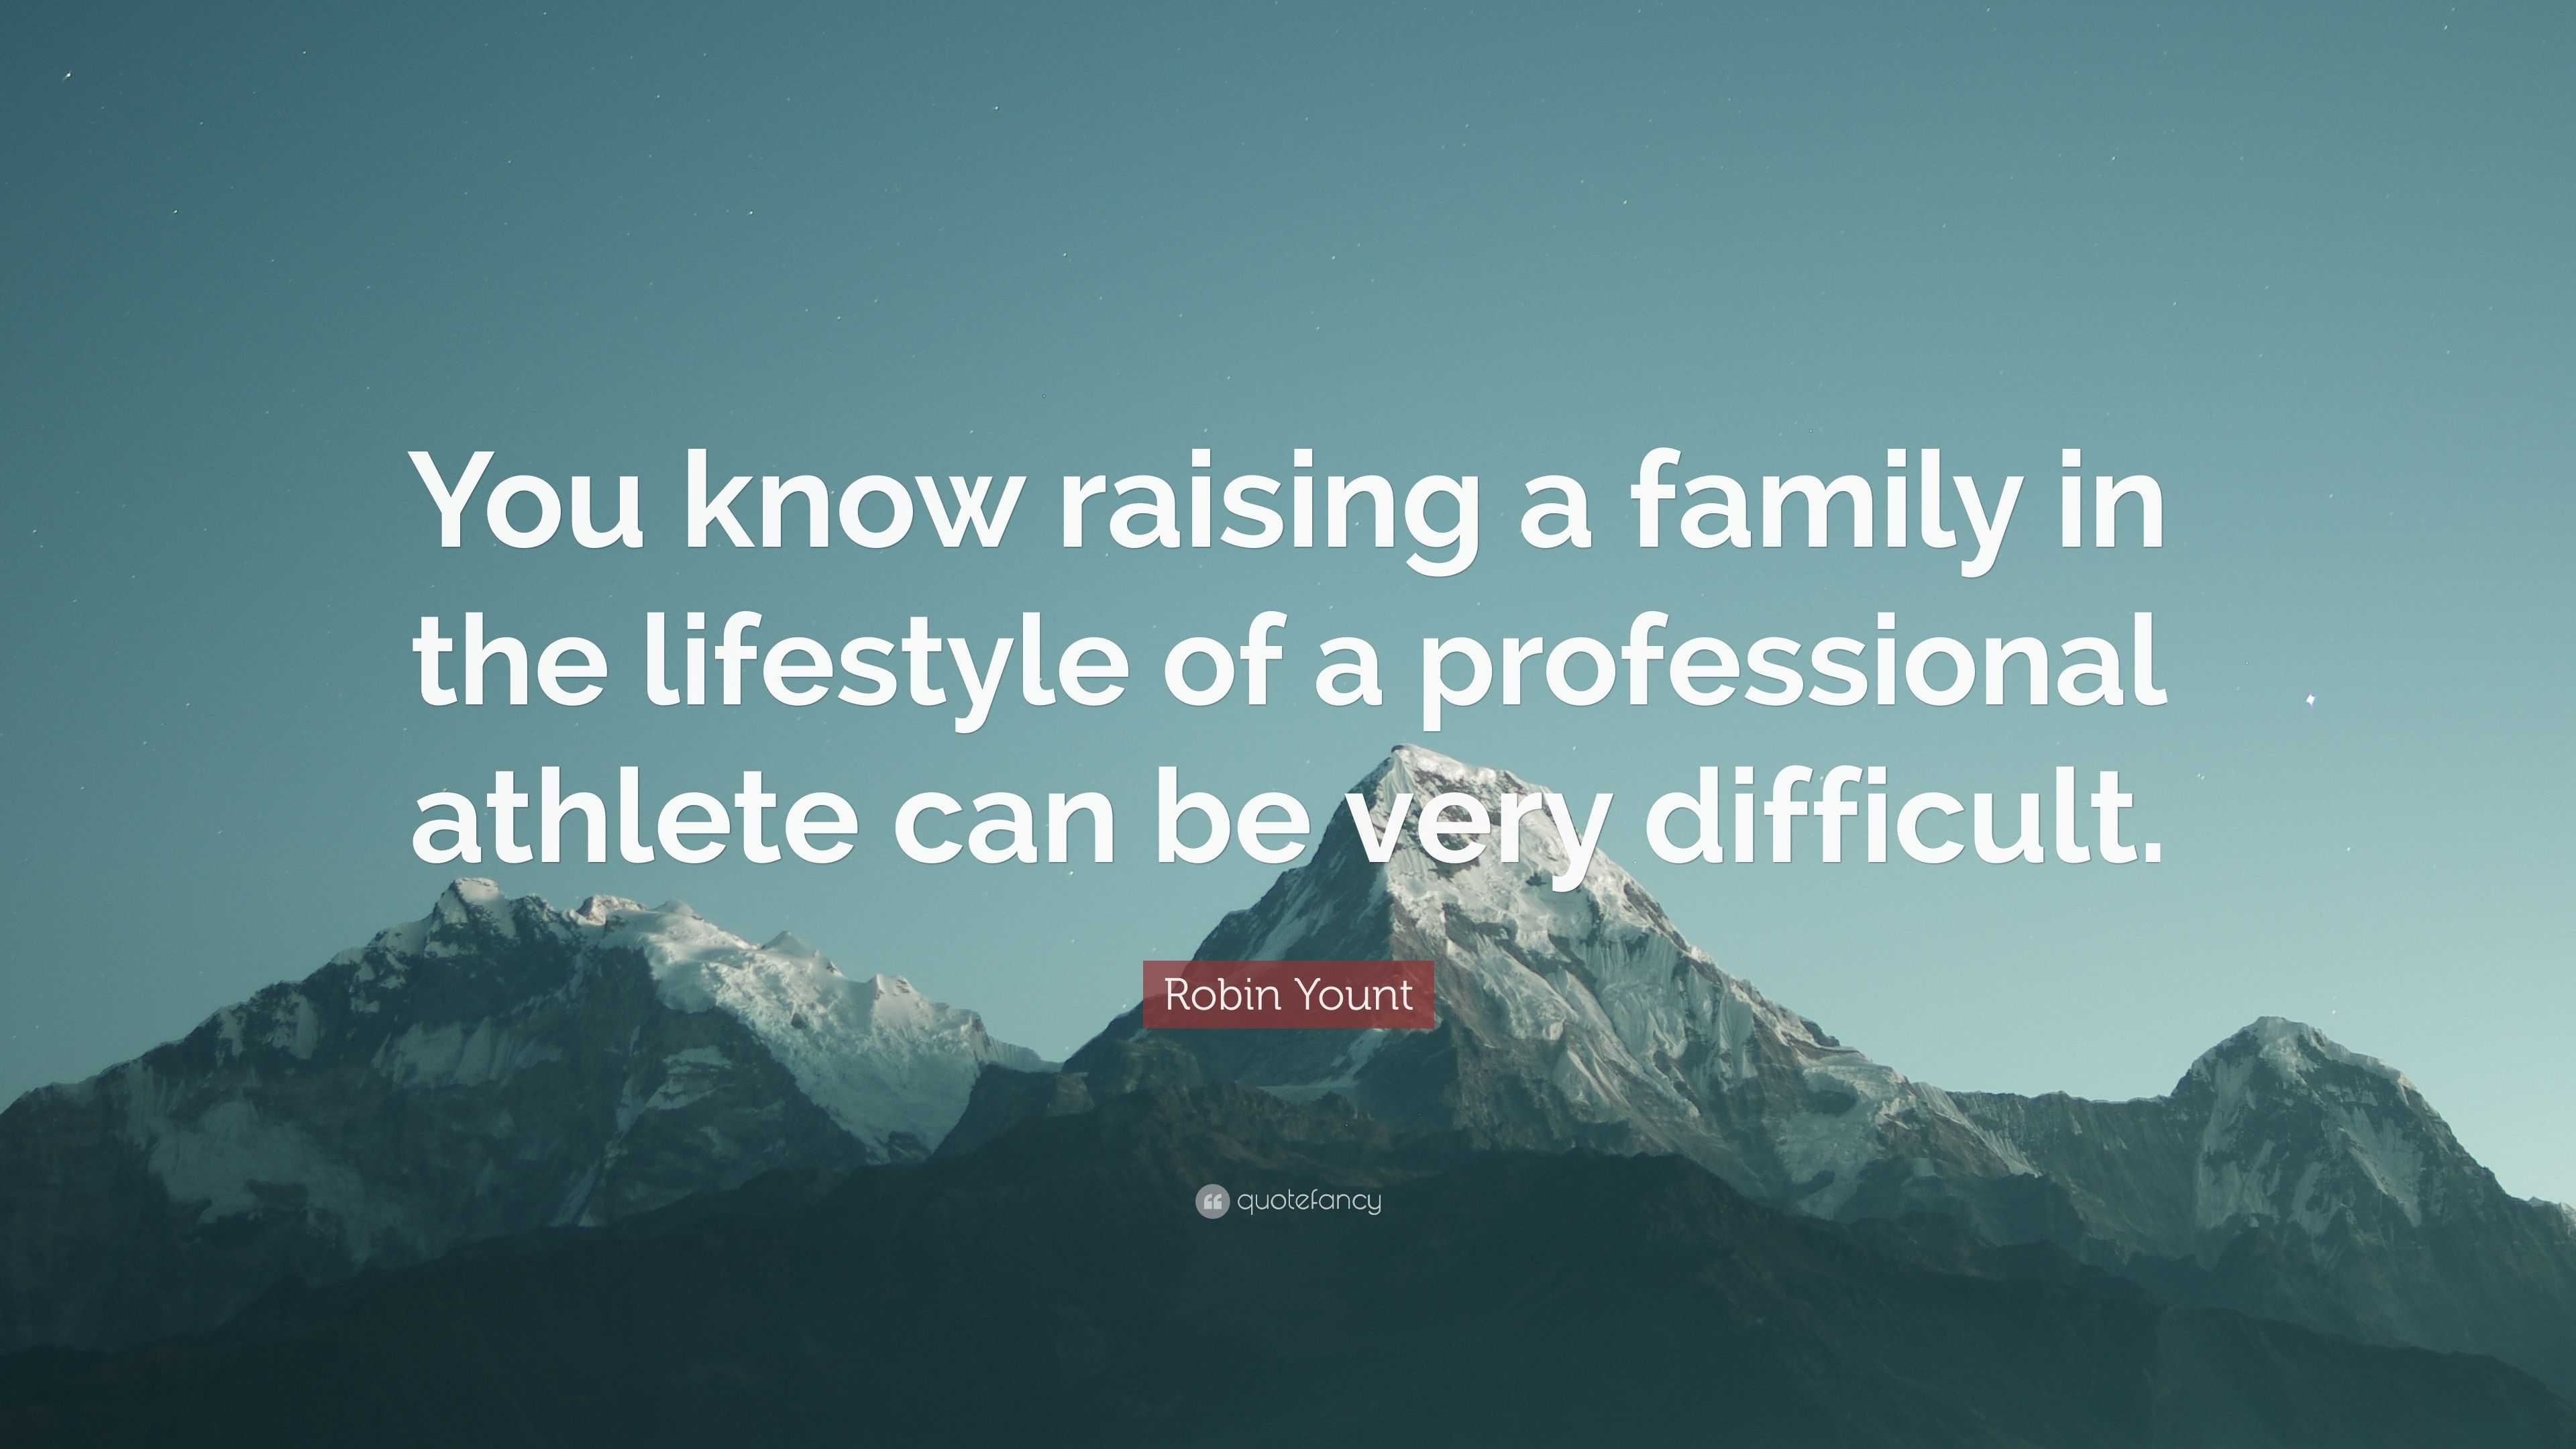 Robin Yount Quote: “You know raising a family in the lifestyle of